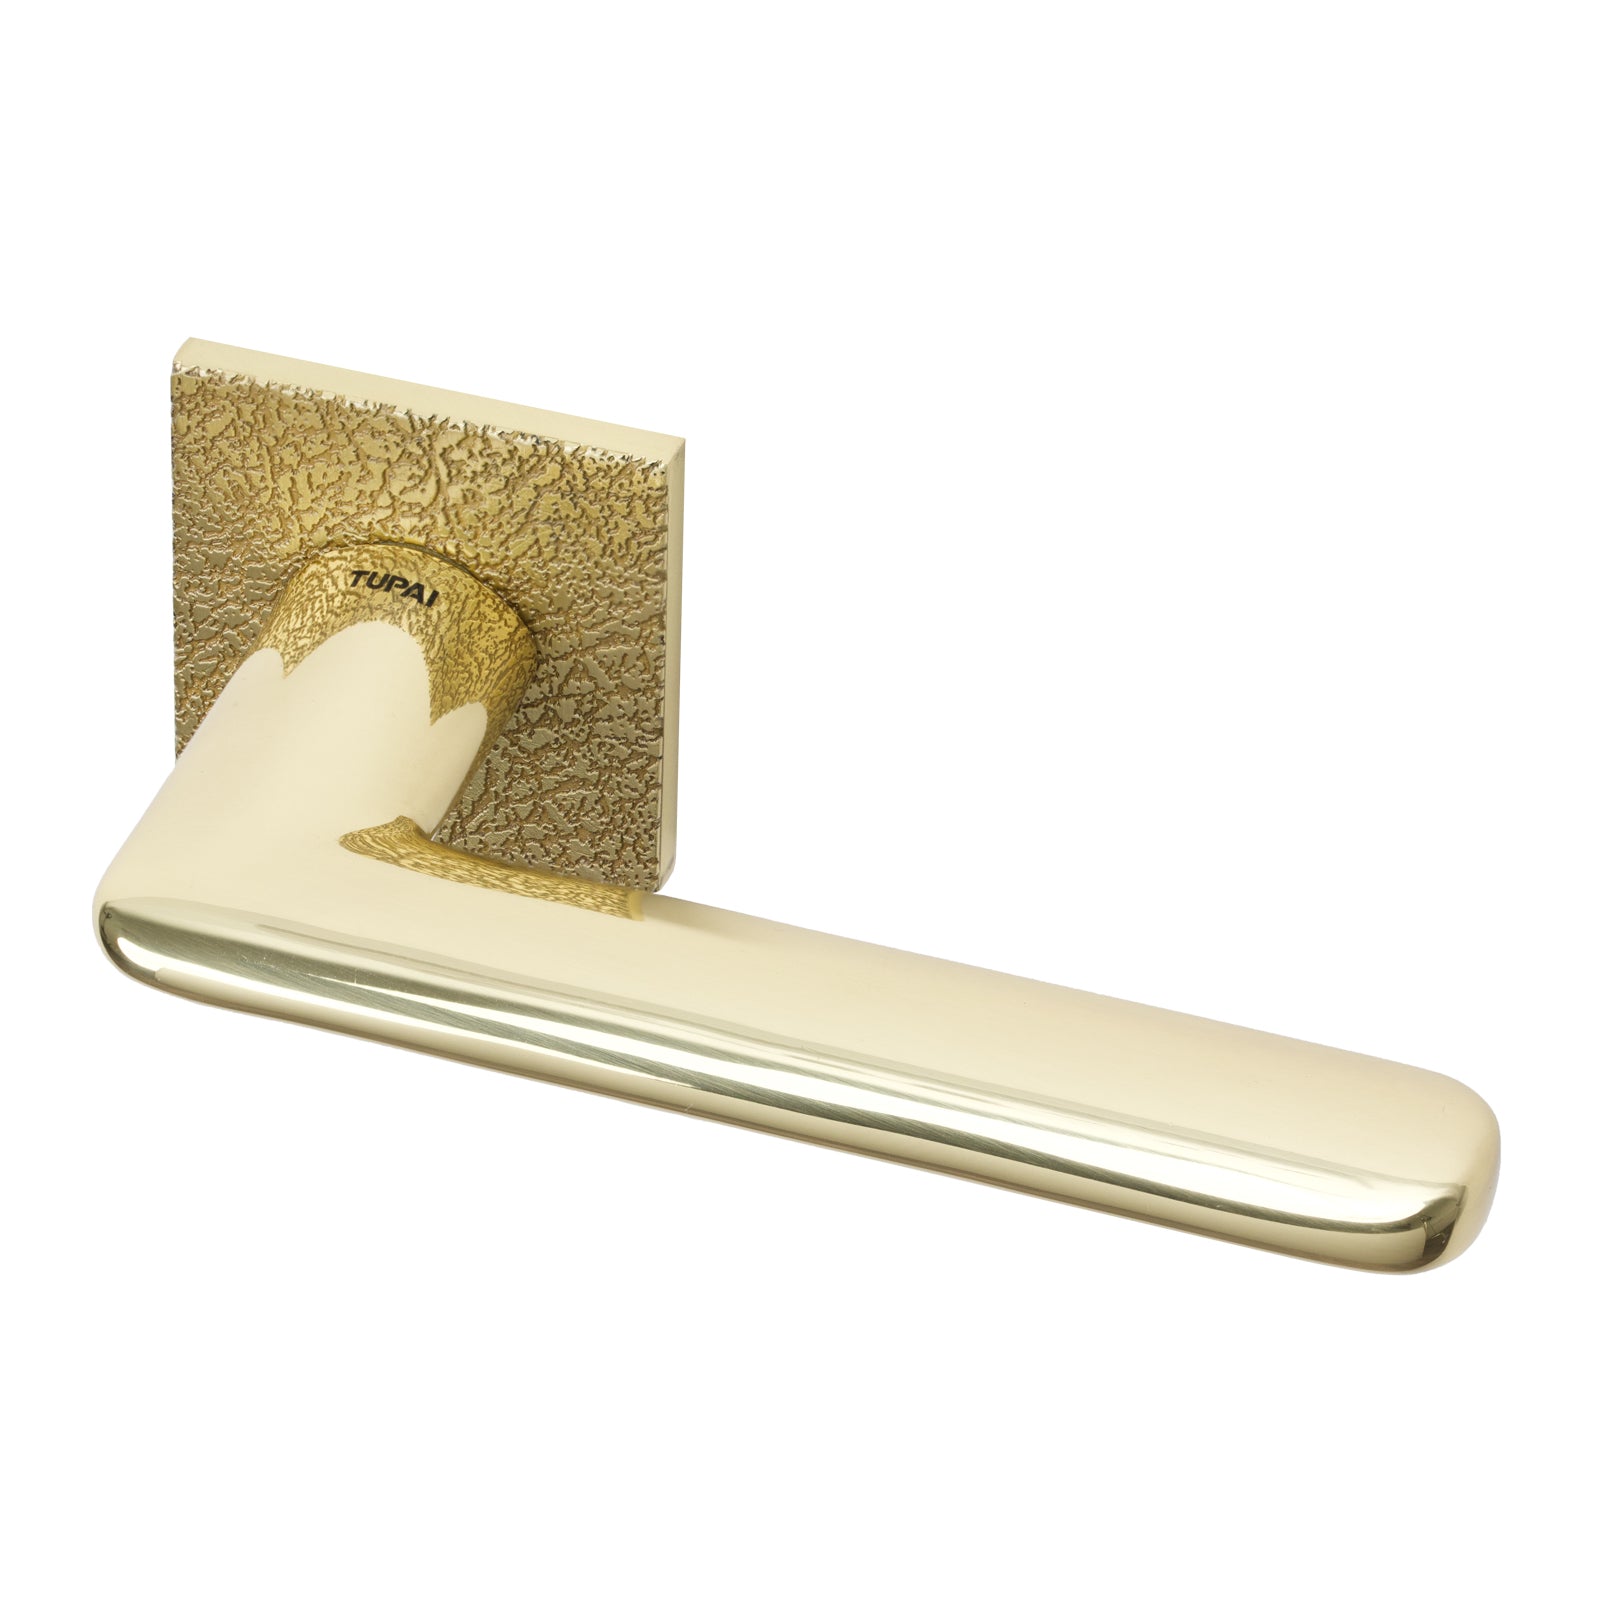 Edral Leather Texture Lever on Rose Door Handle in Polished Brass Finish SHOW